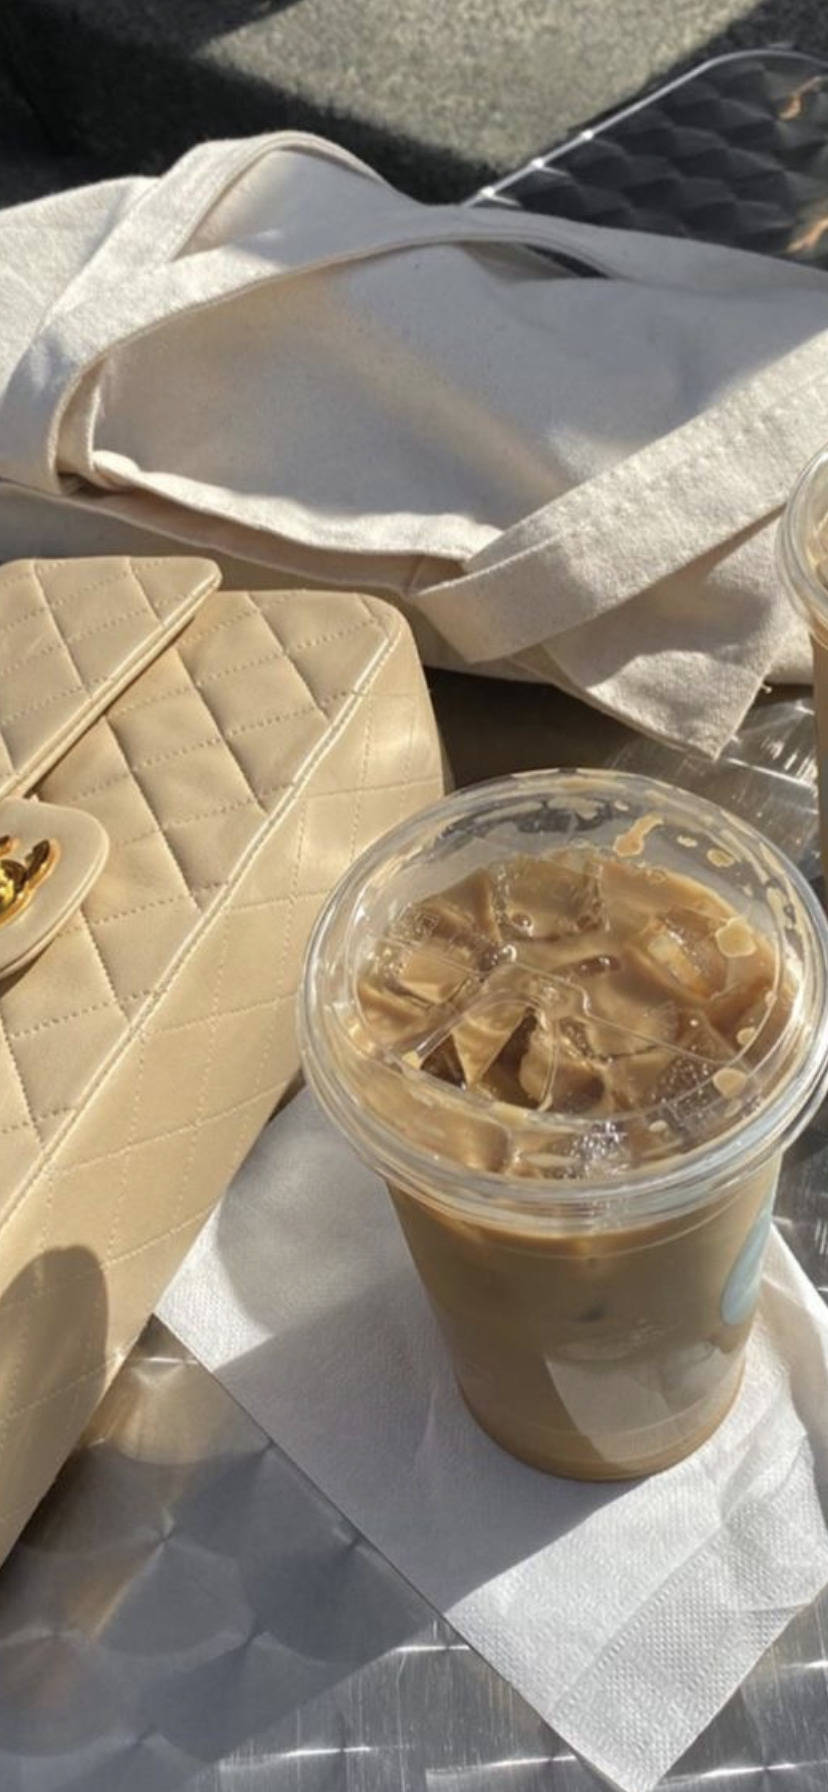 Beige Purse And Iced Coffee Aesthetic Background